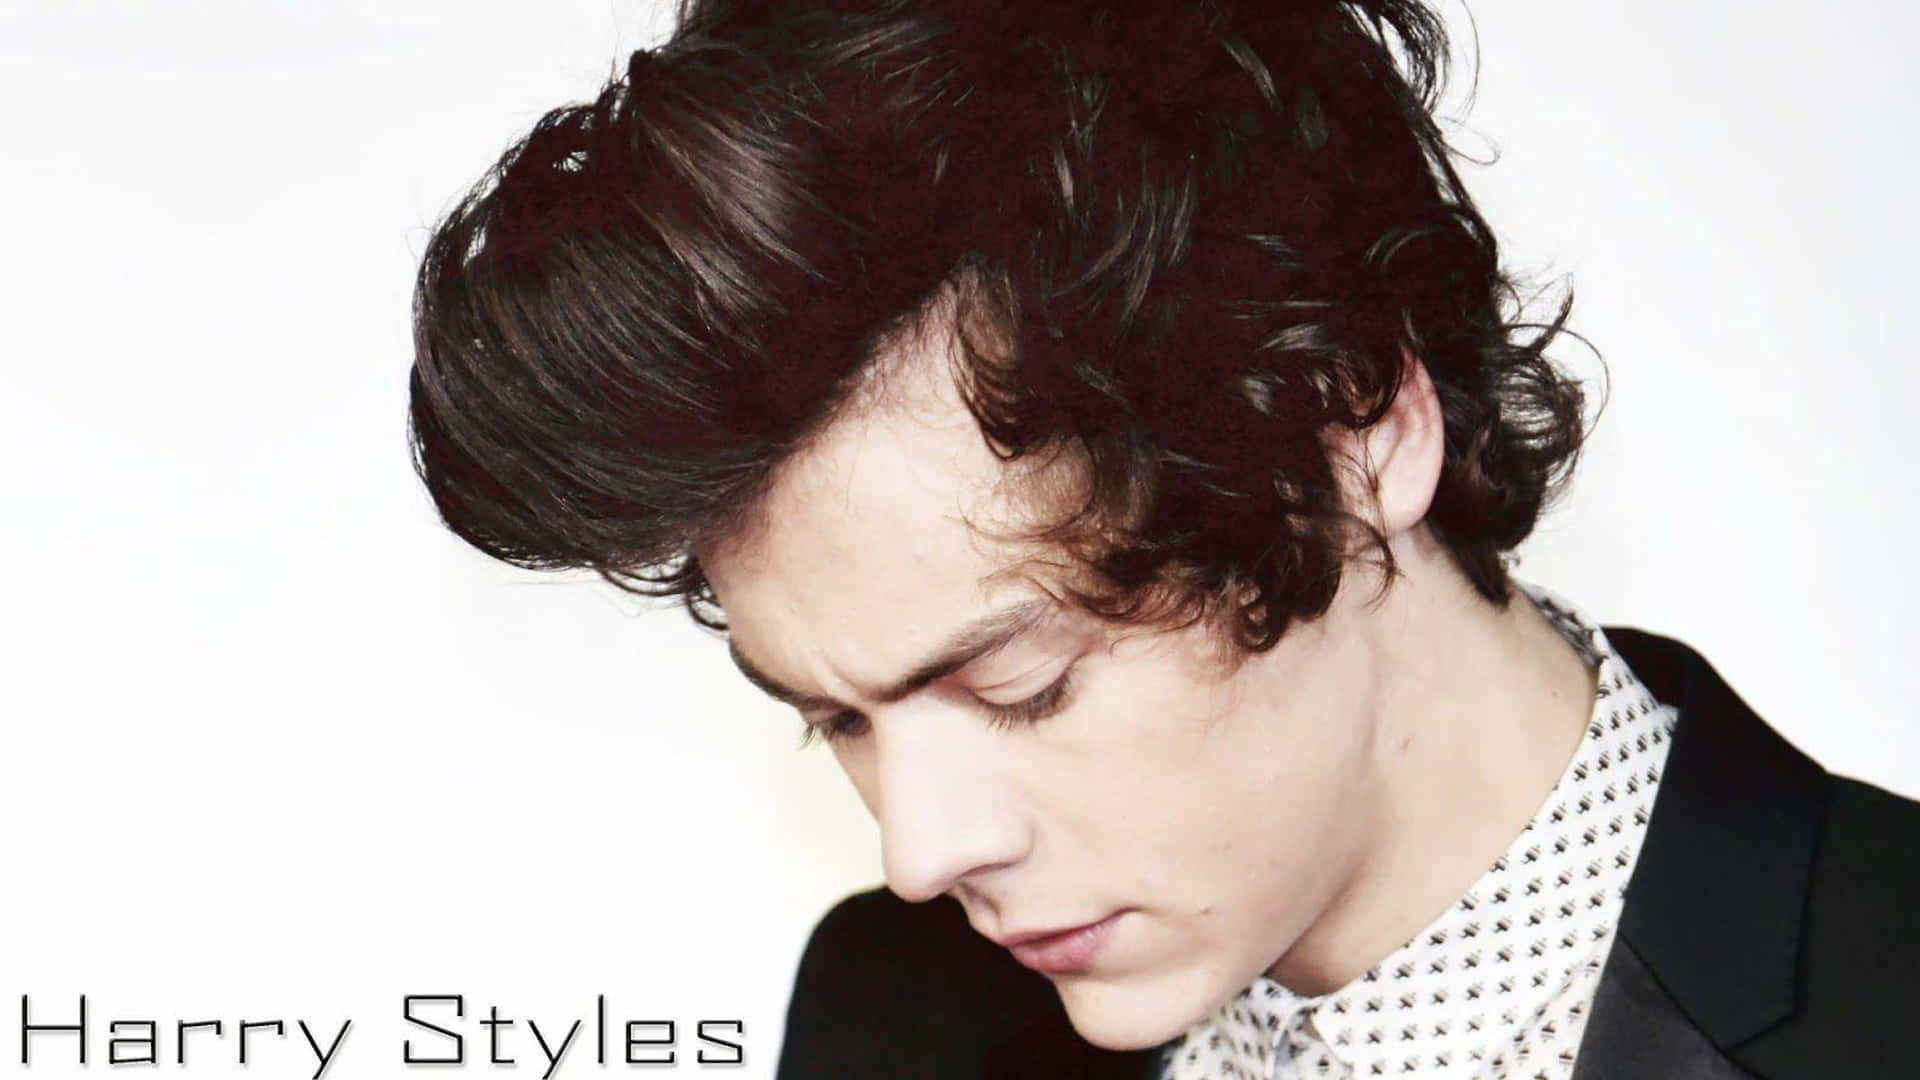 Get the Look with Harry Styles' Black and White Style Wallpaper